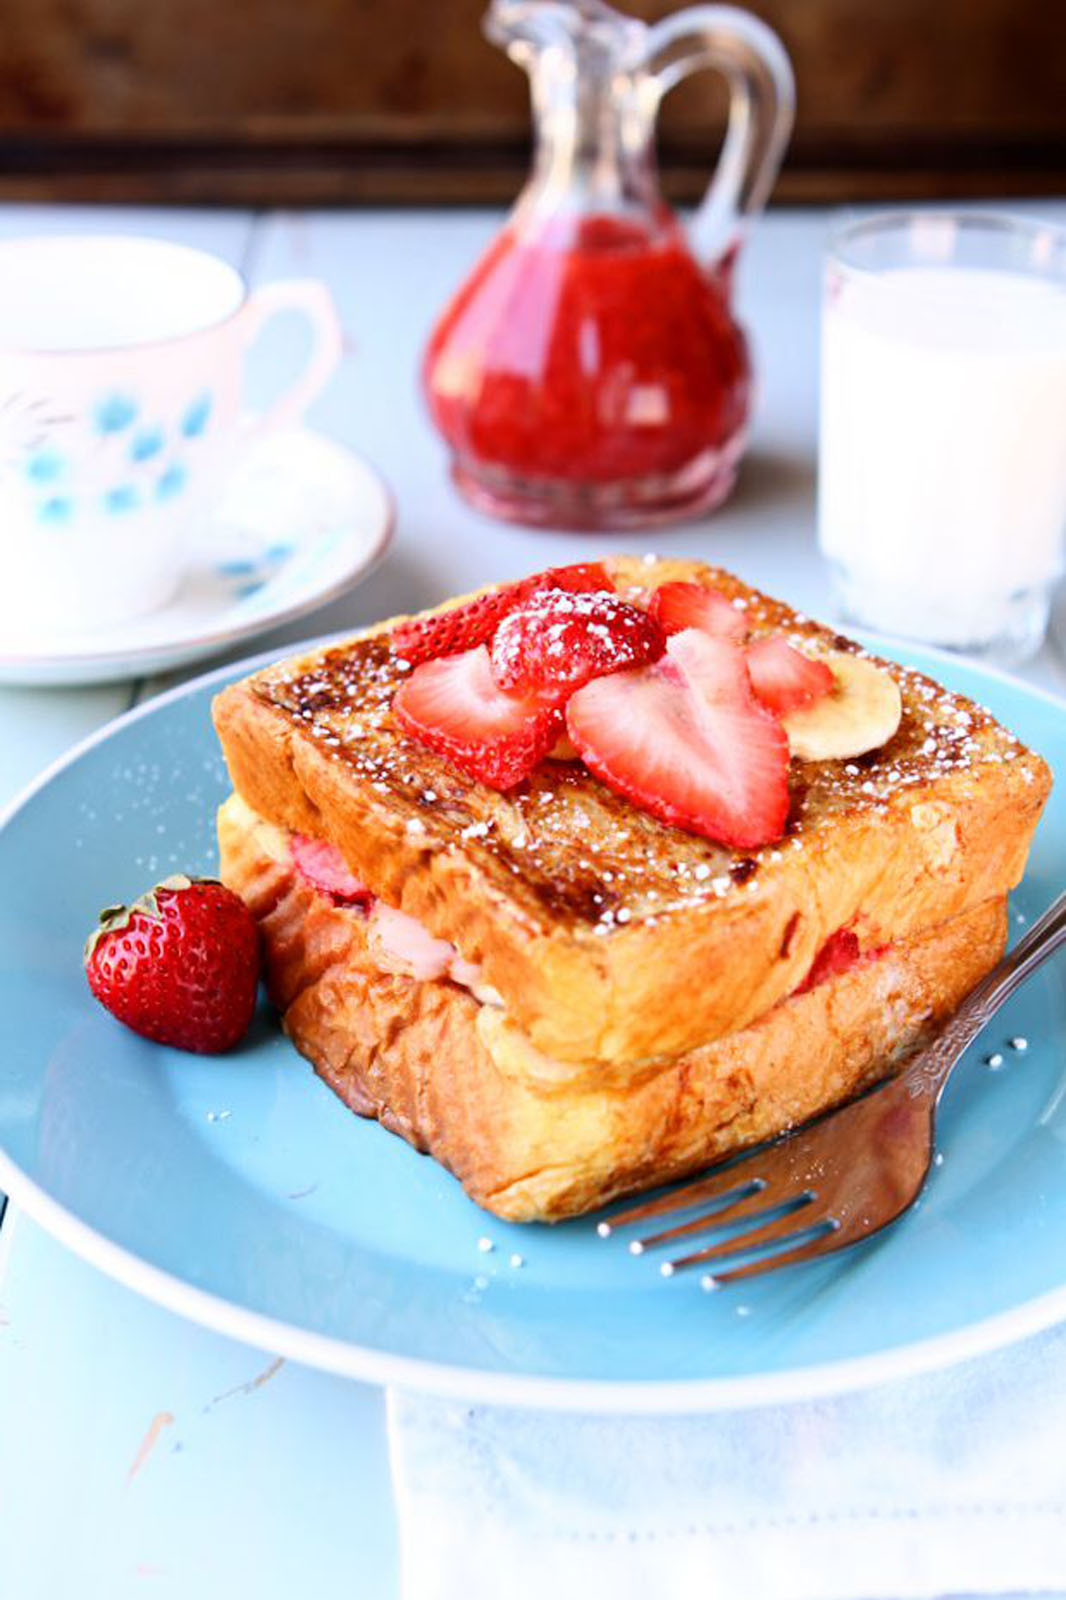 French toast on a blue plate with a carafe of strawberry compote in the background